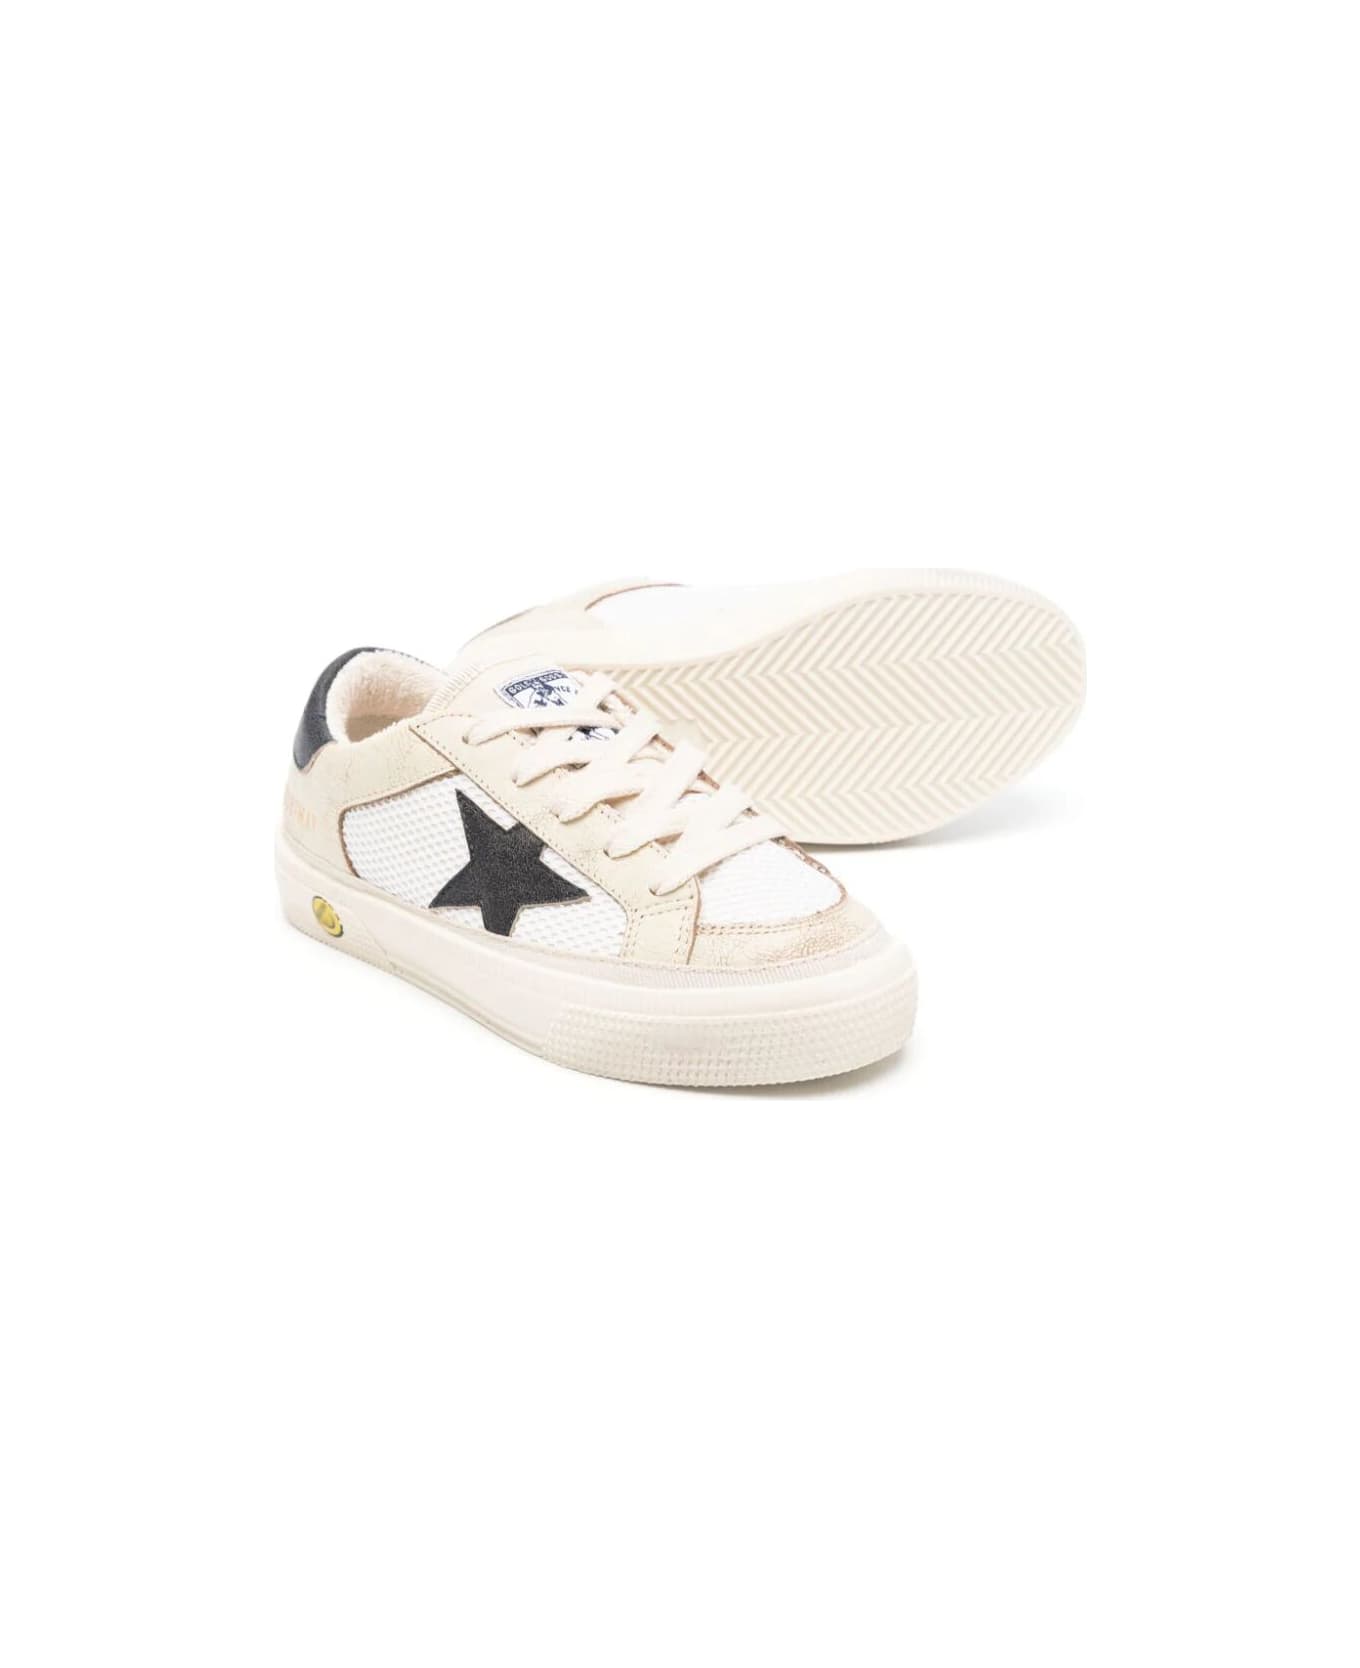 Golden Goose May Nappa Net And Leather Upper Nylon Tongue Leather Toe Star And Heel - White Blue シューズ